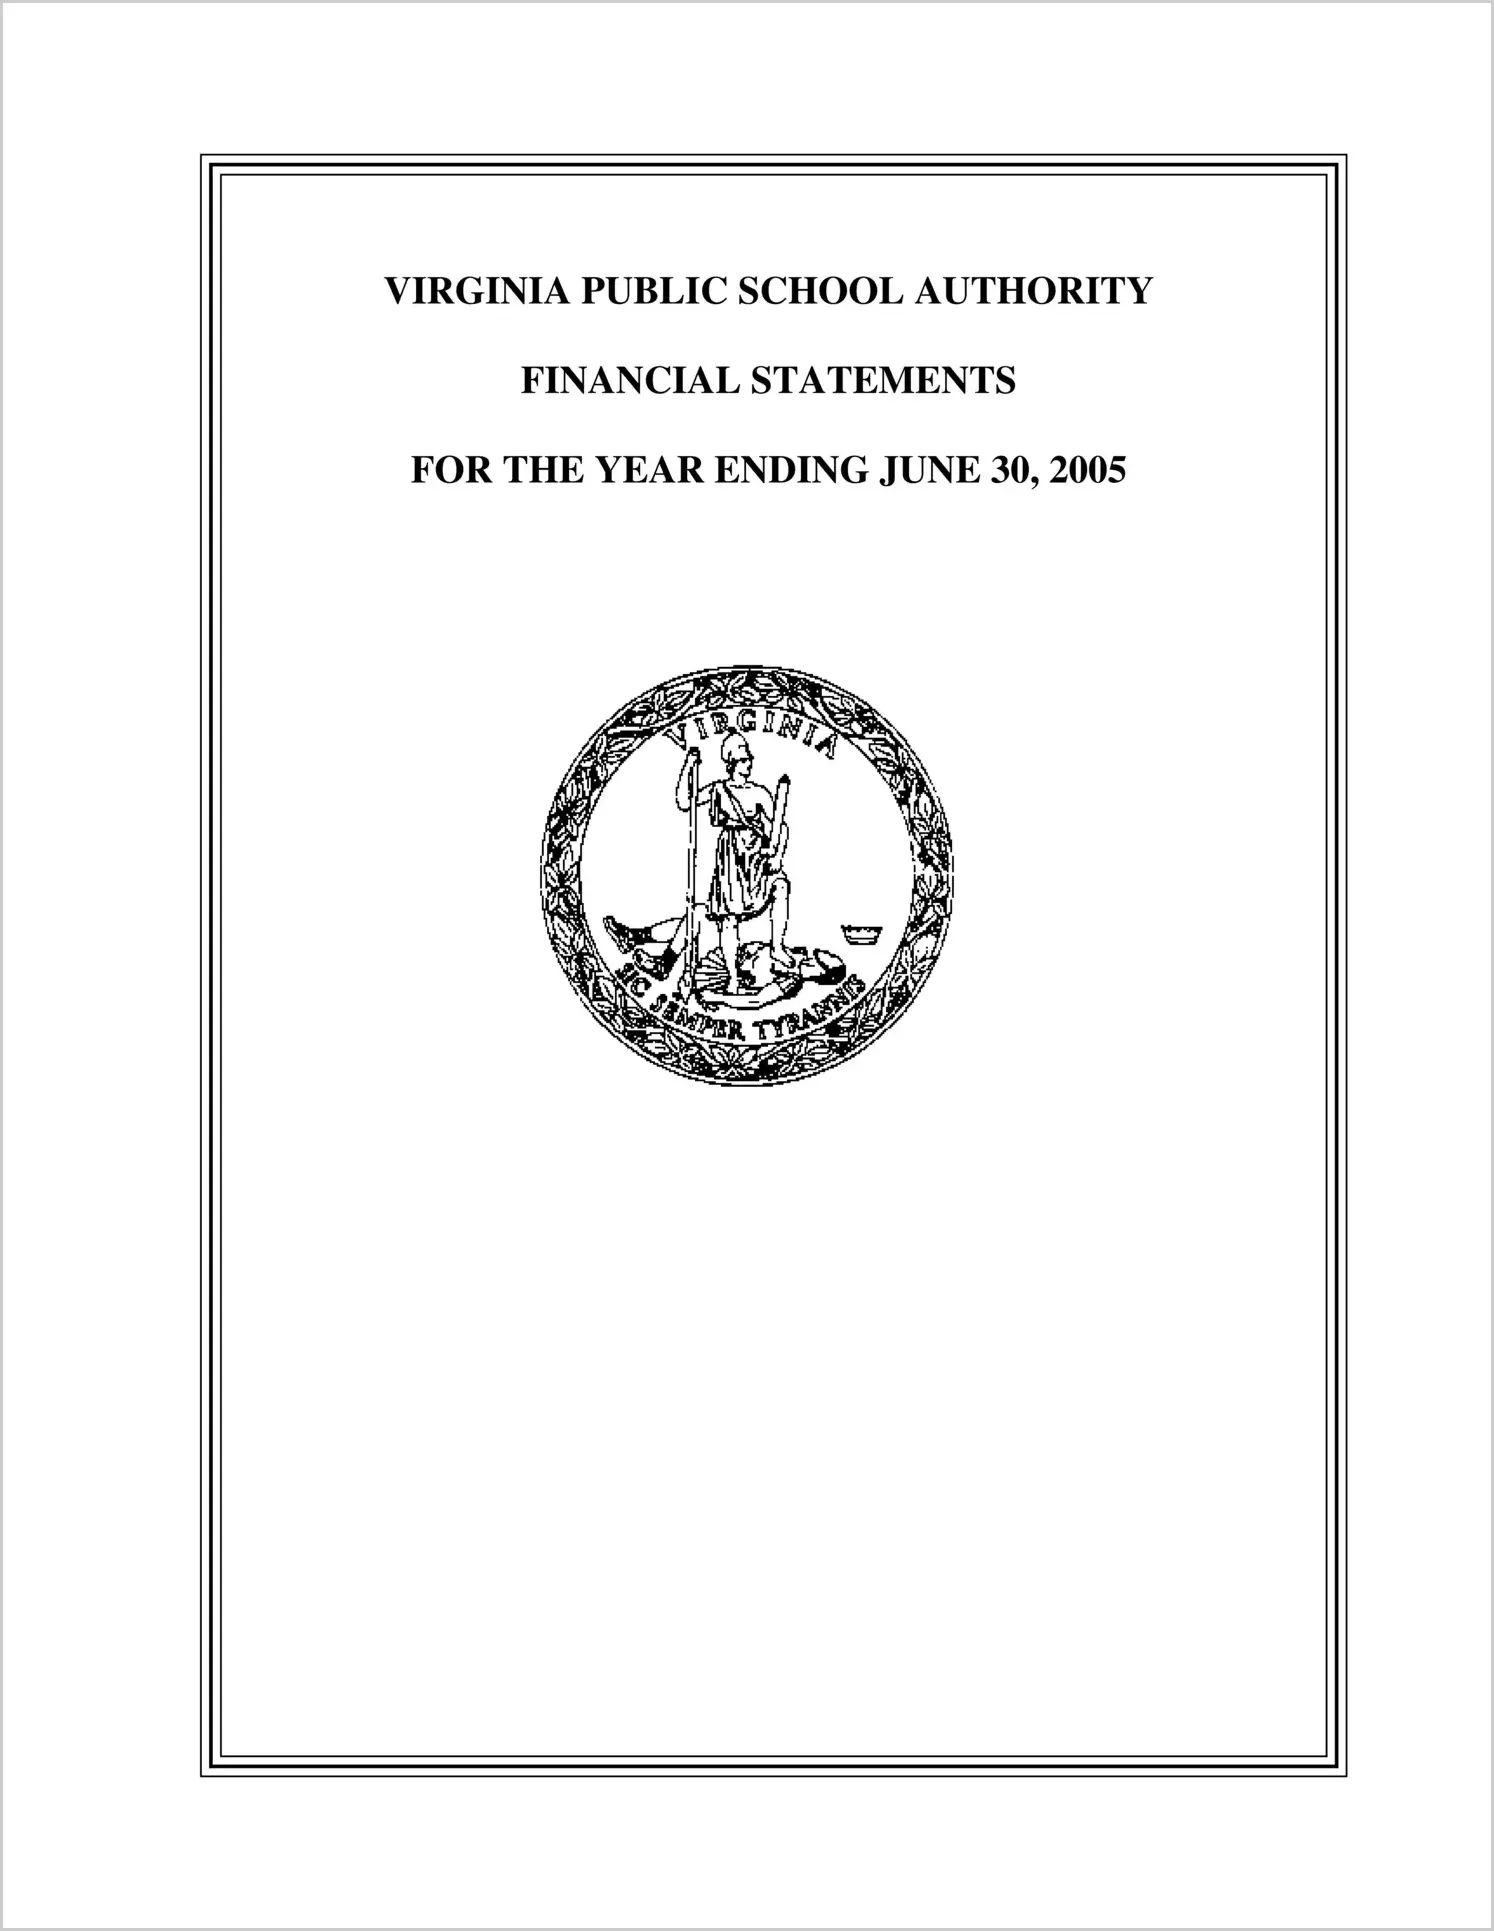 Virginia Public School Authority Financial Statements for the year ended June 30, 2005